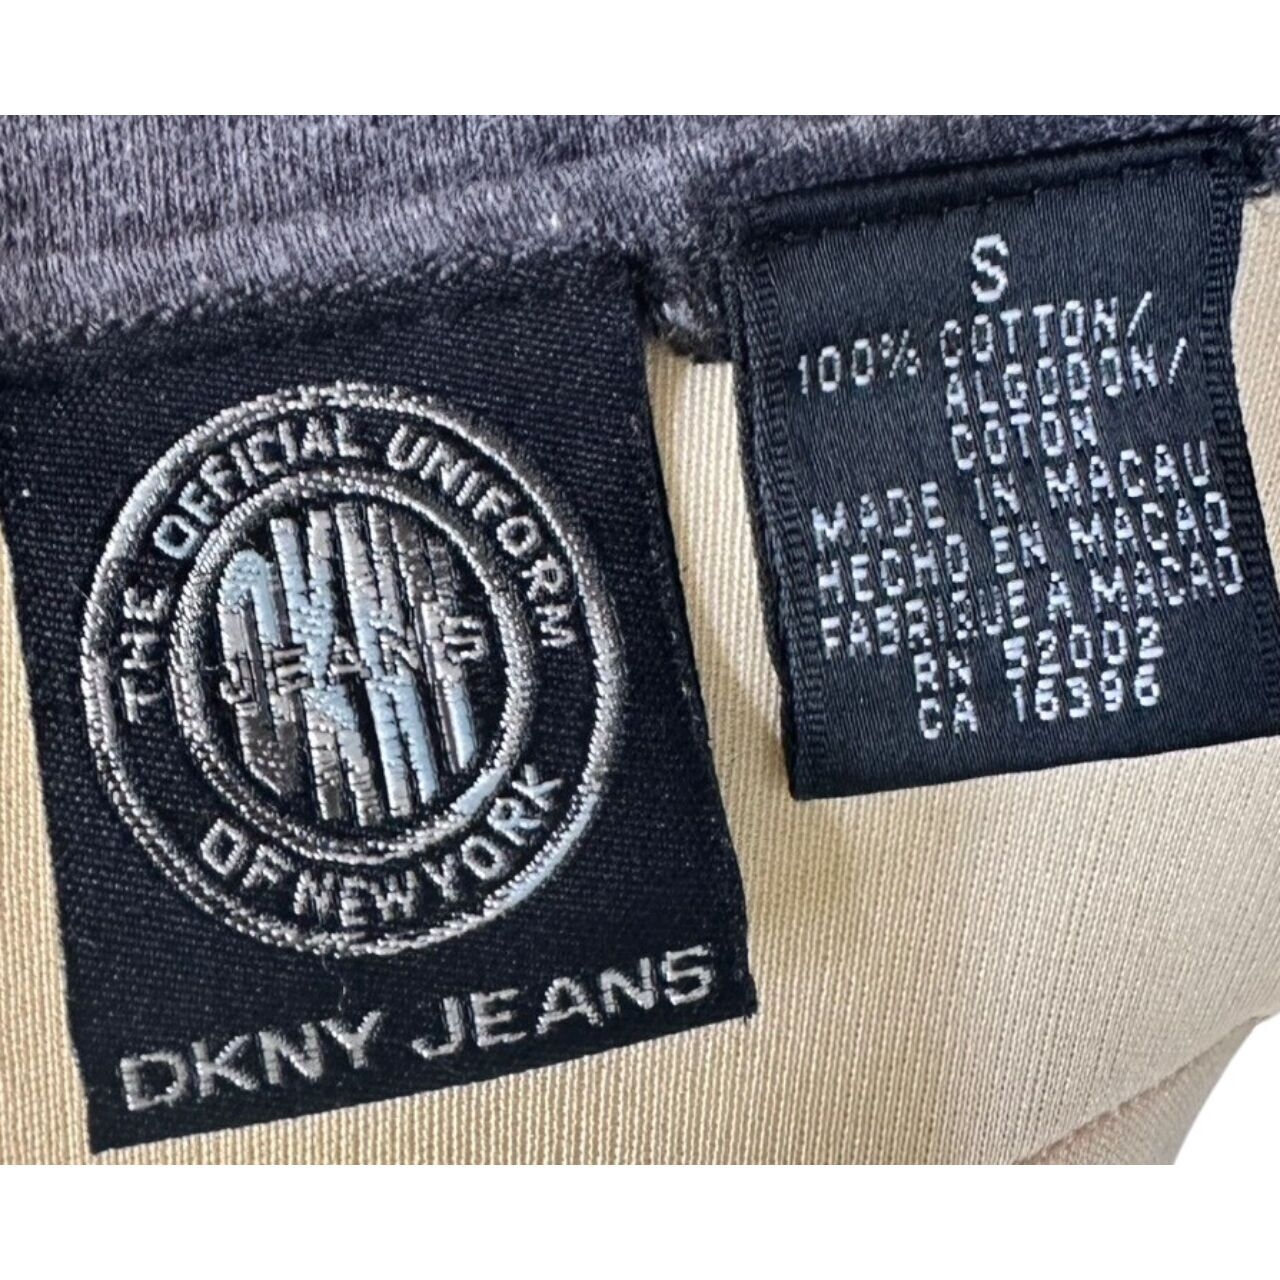 Dkny Jeans Grey Cotton Top